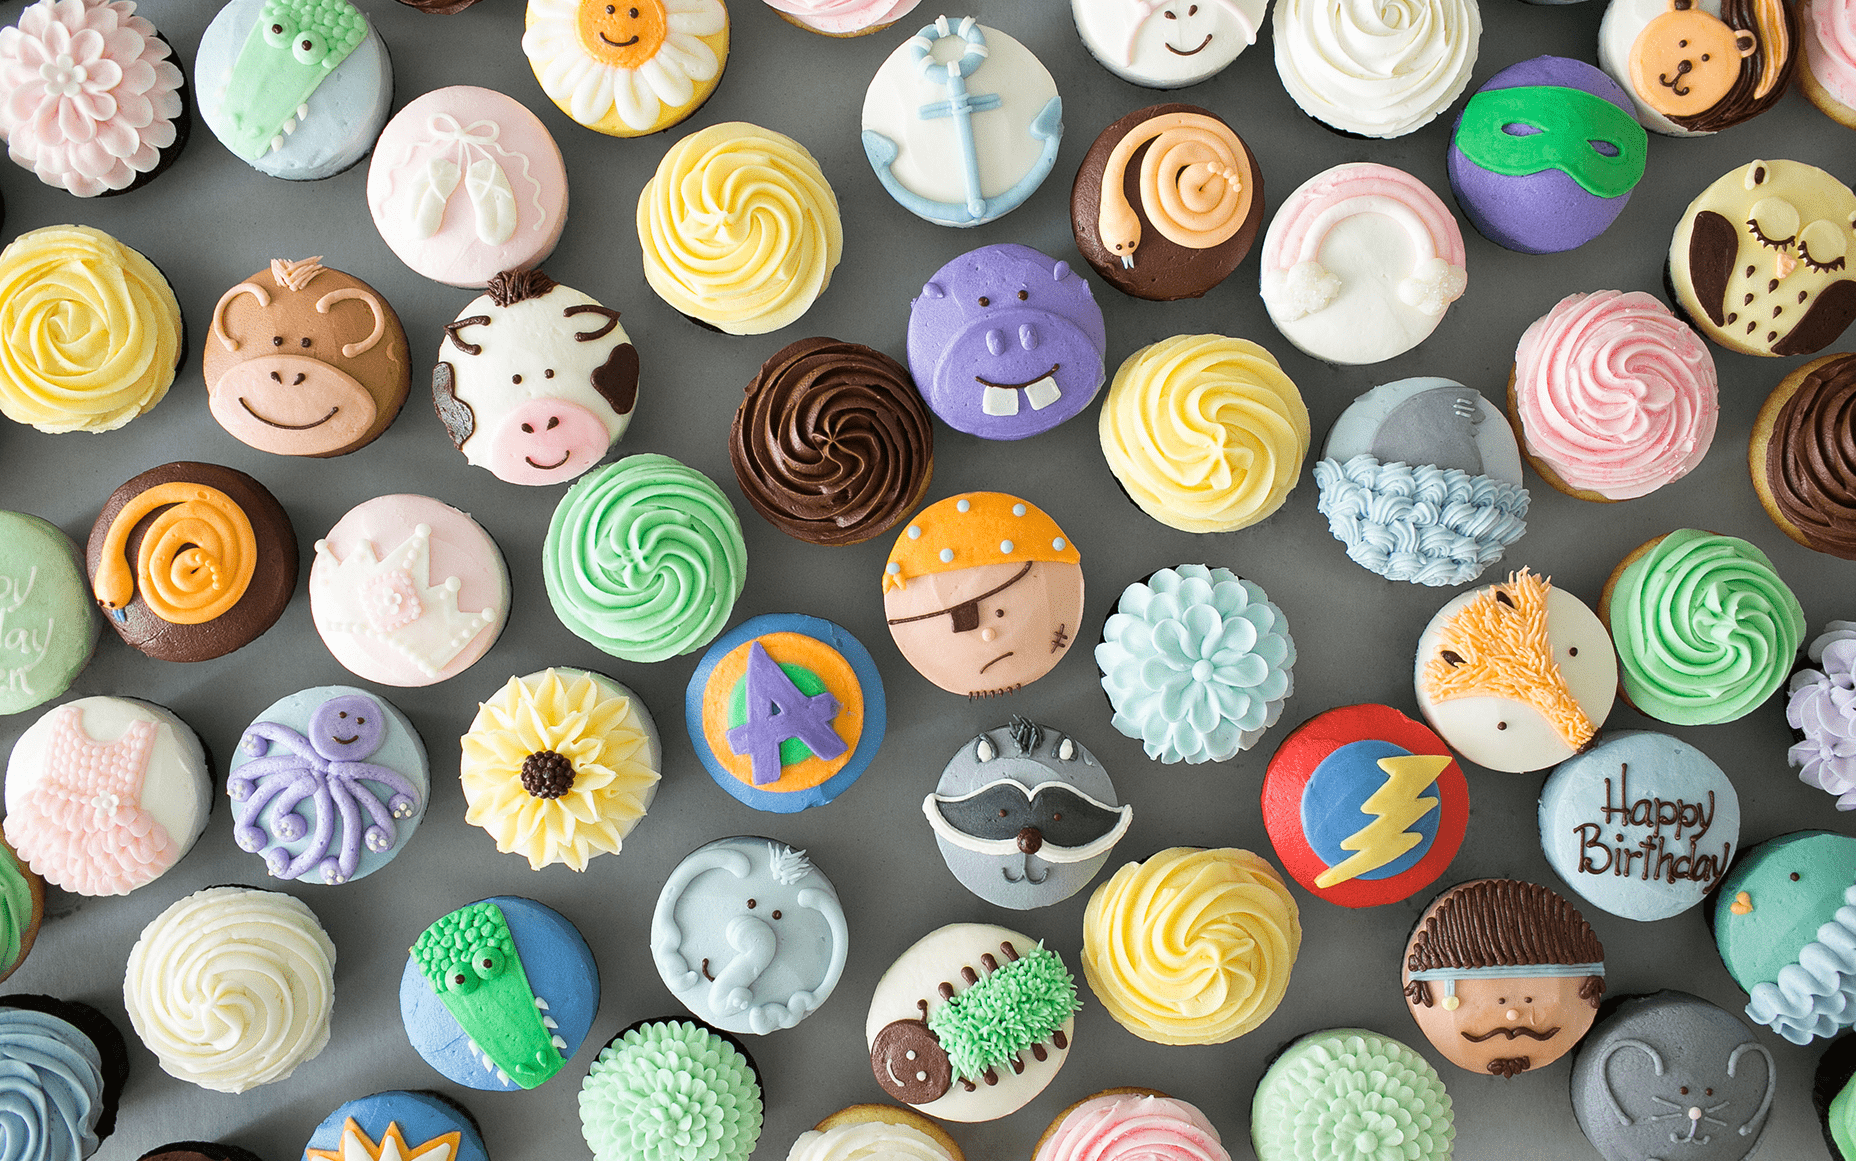 A variety of cupcakes with different icing designs - Cupcakes